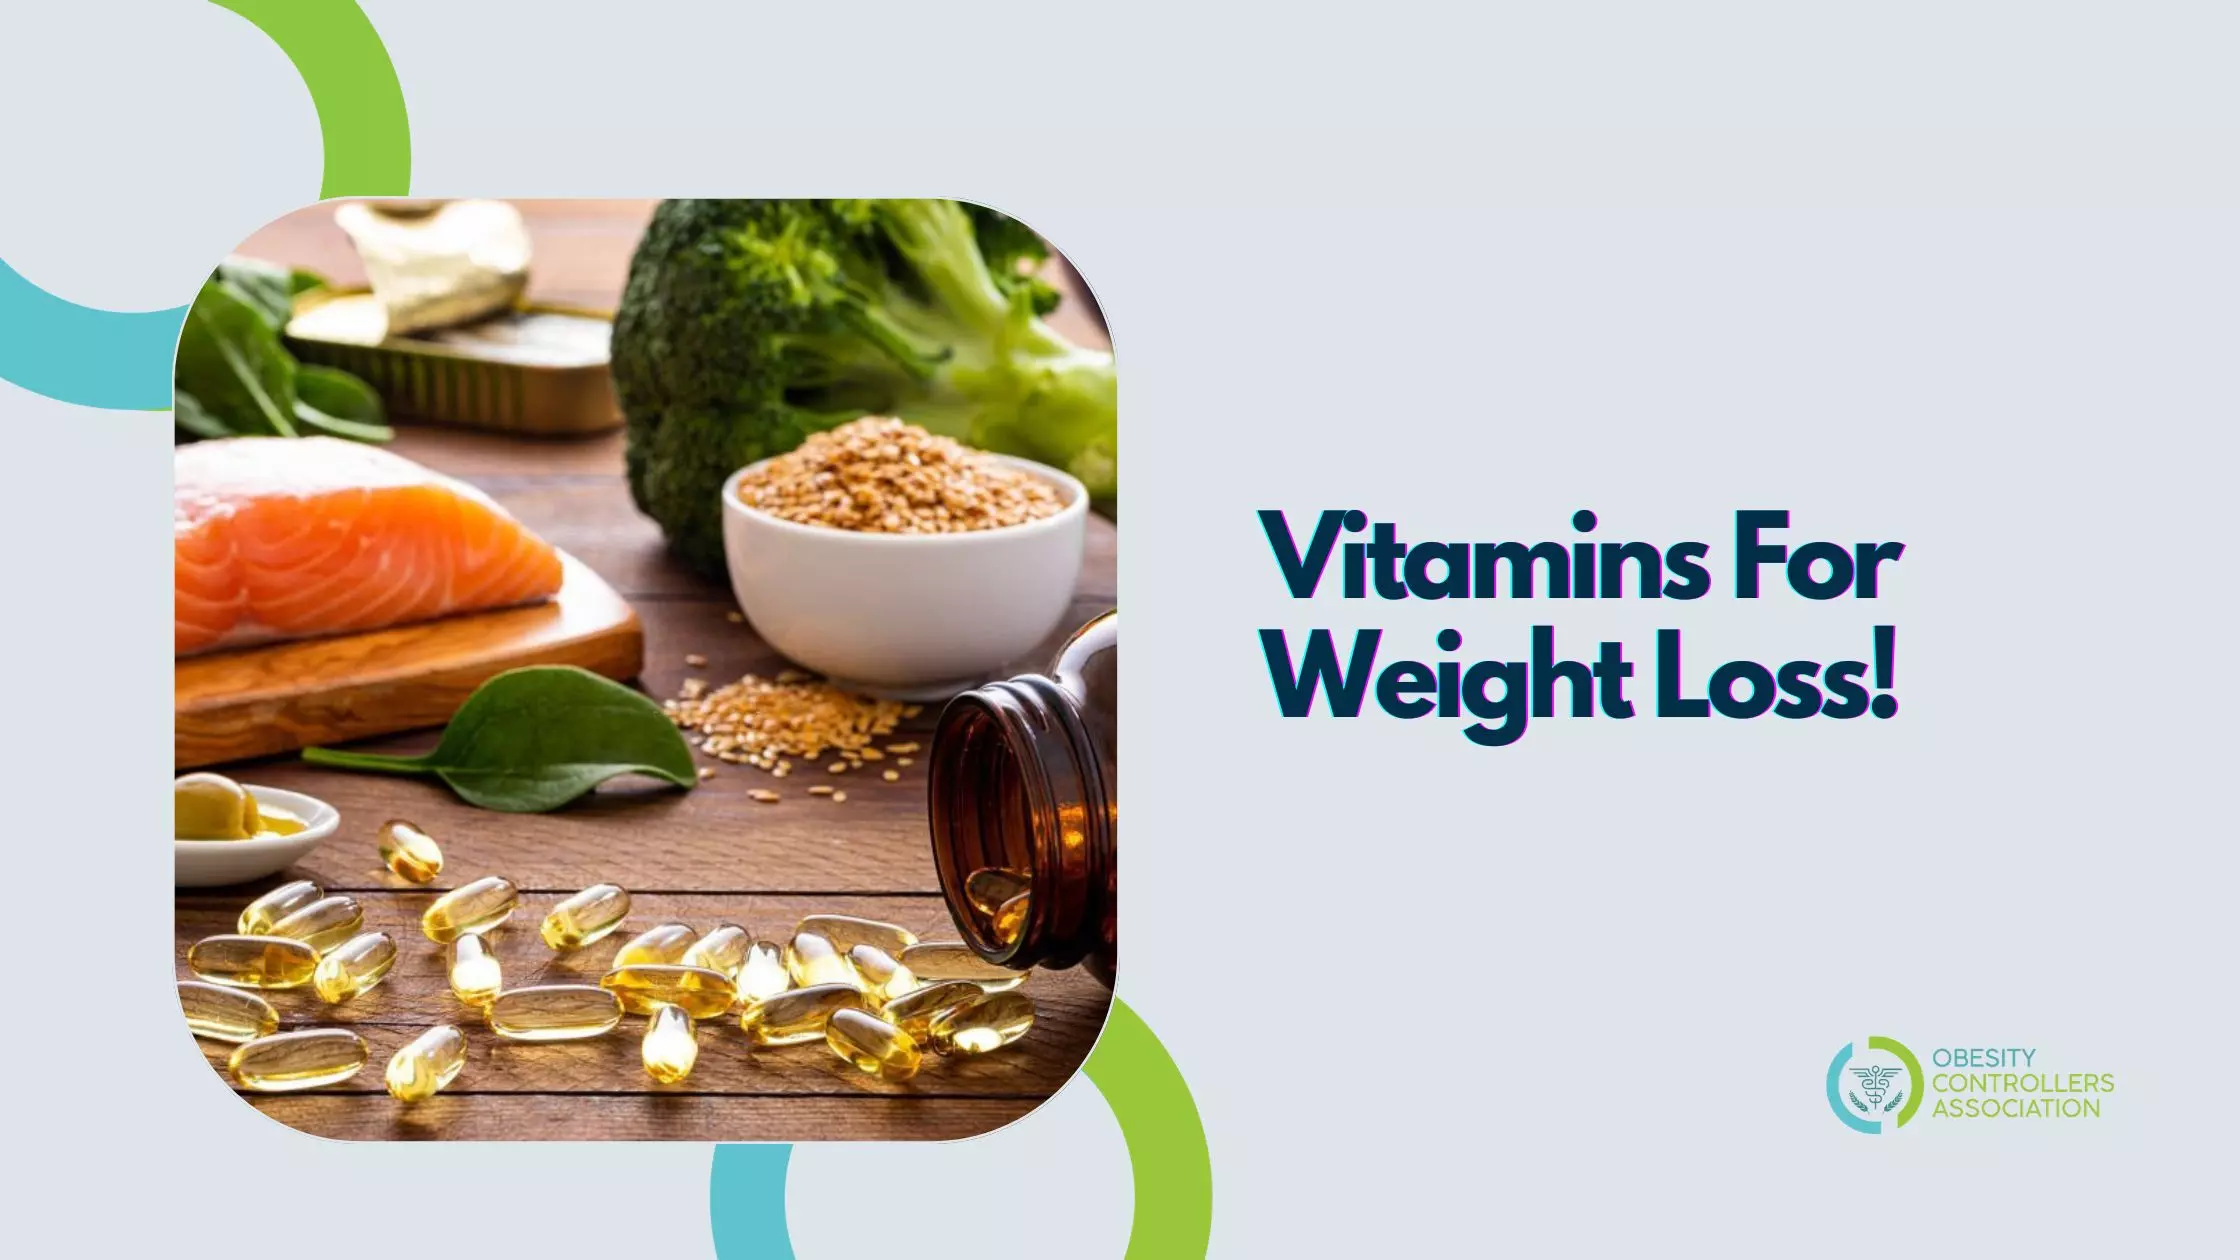 Vitamins For Weight Loss!